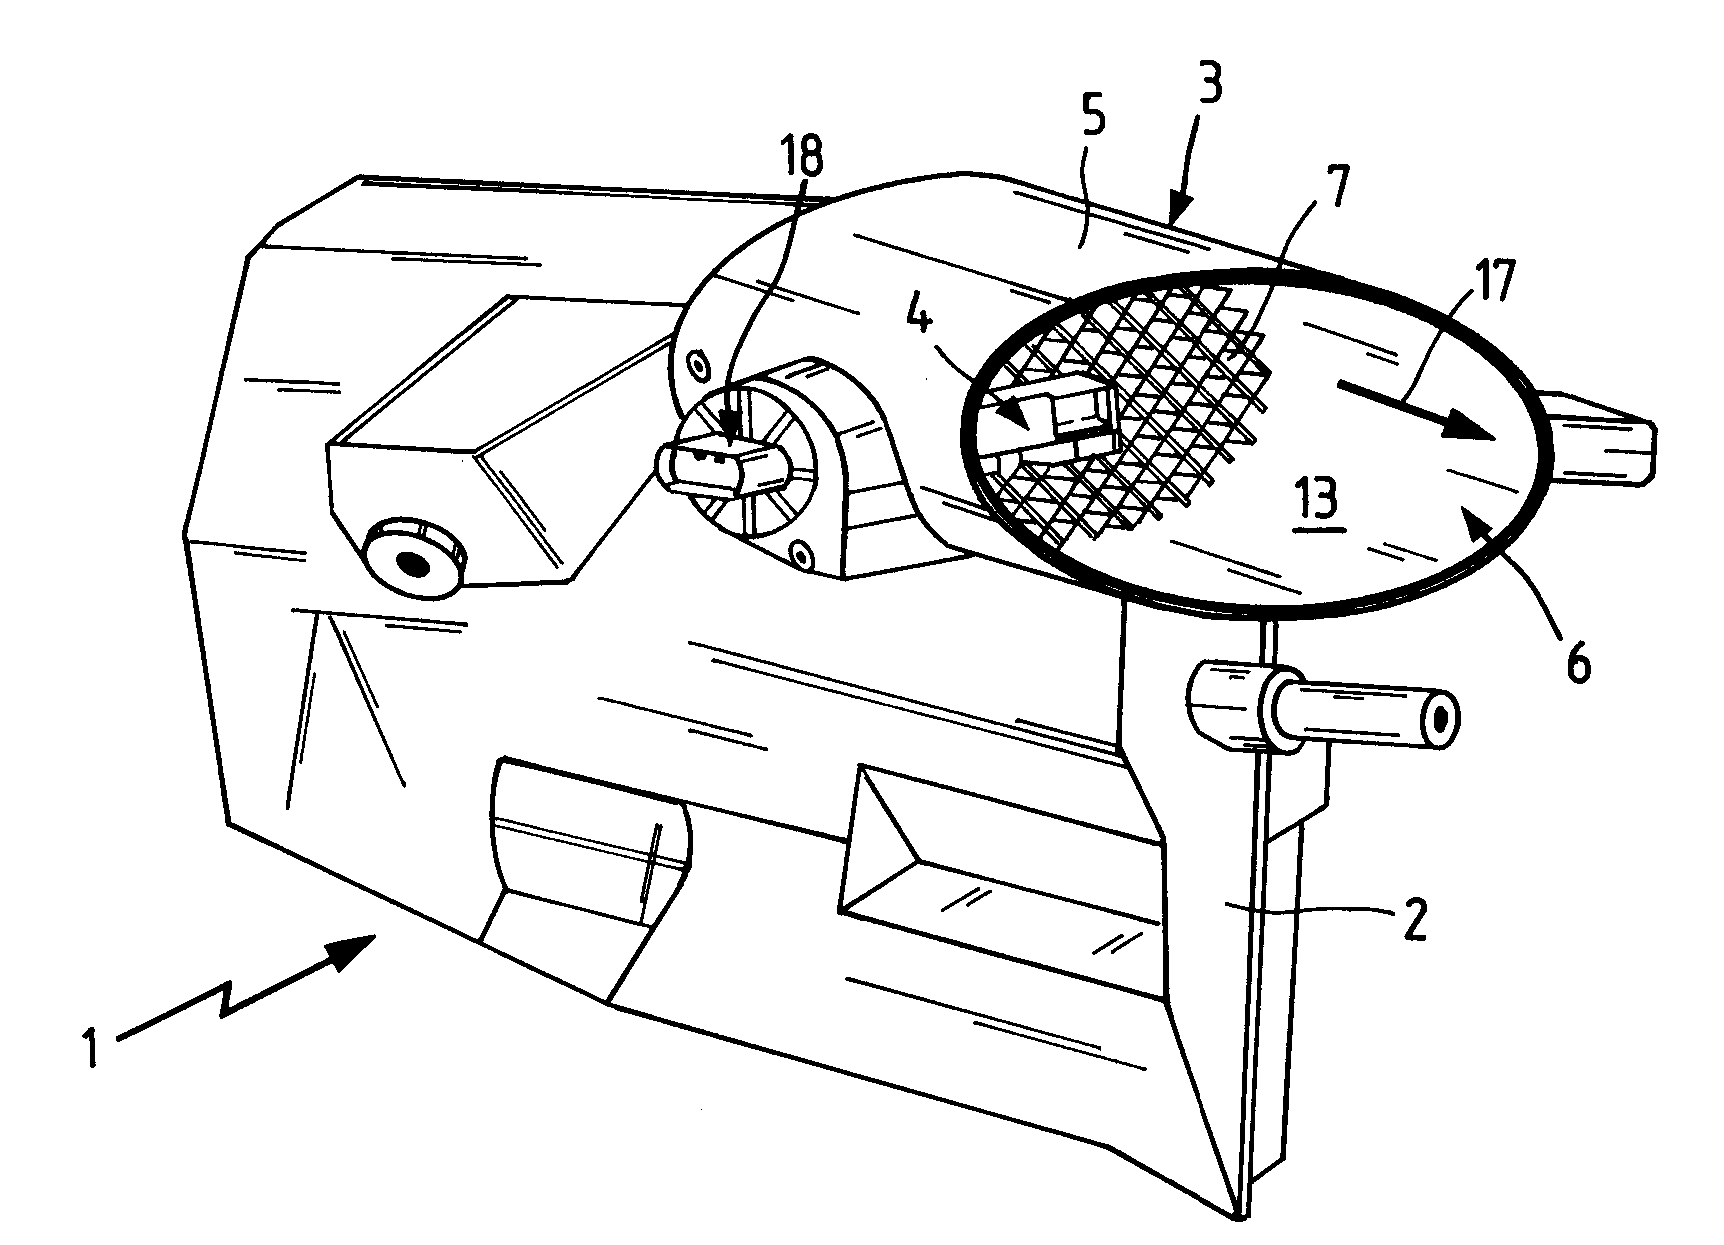 Air filter system of a motor vehicle